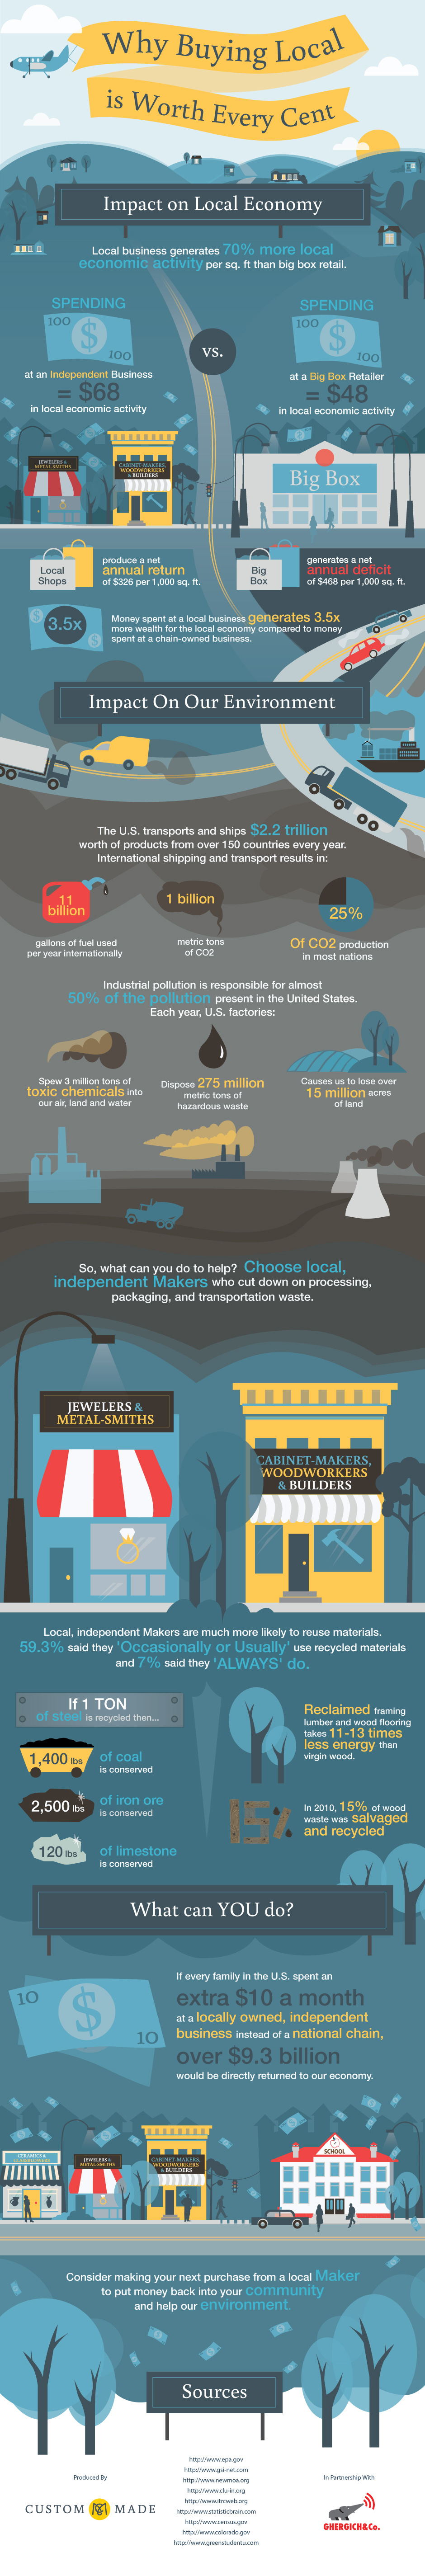 Why Buy Local Infographic